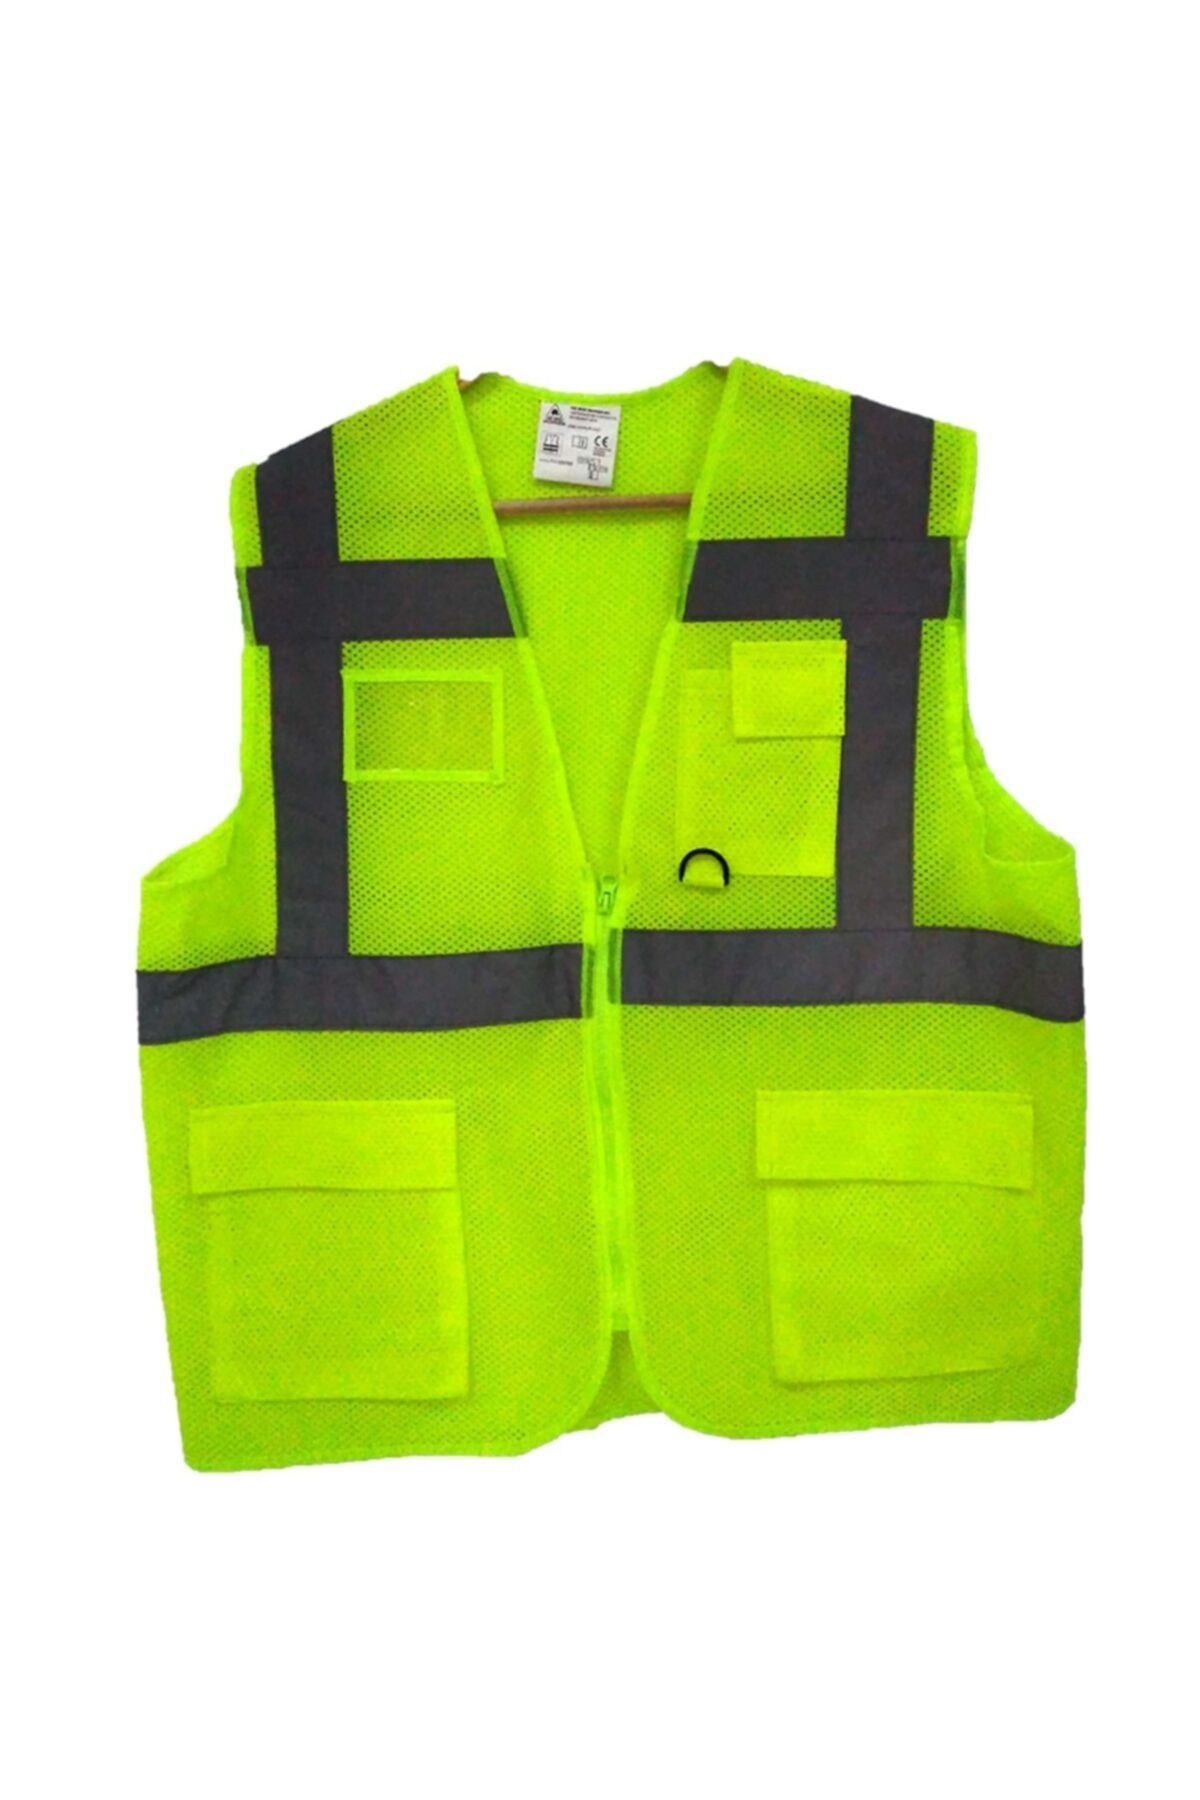 Warning Vest Engineer Type CE Certified Pocketed Yellow Green